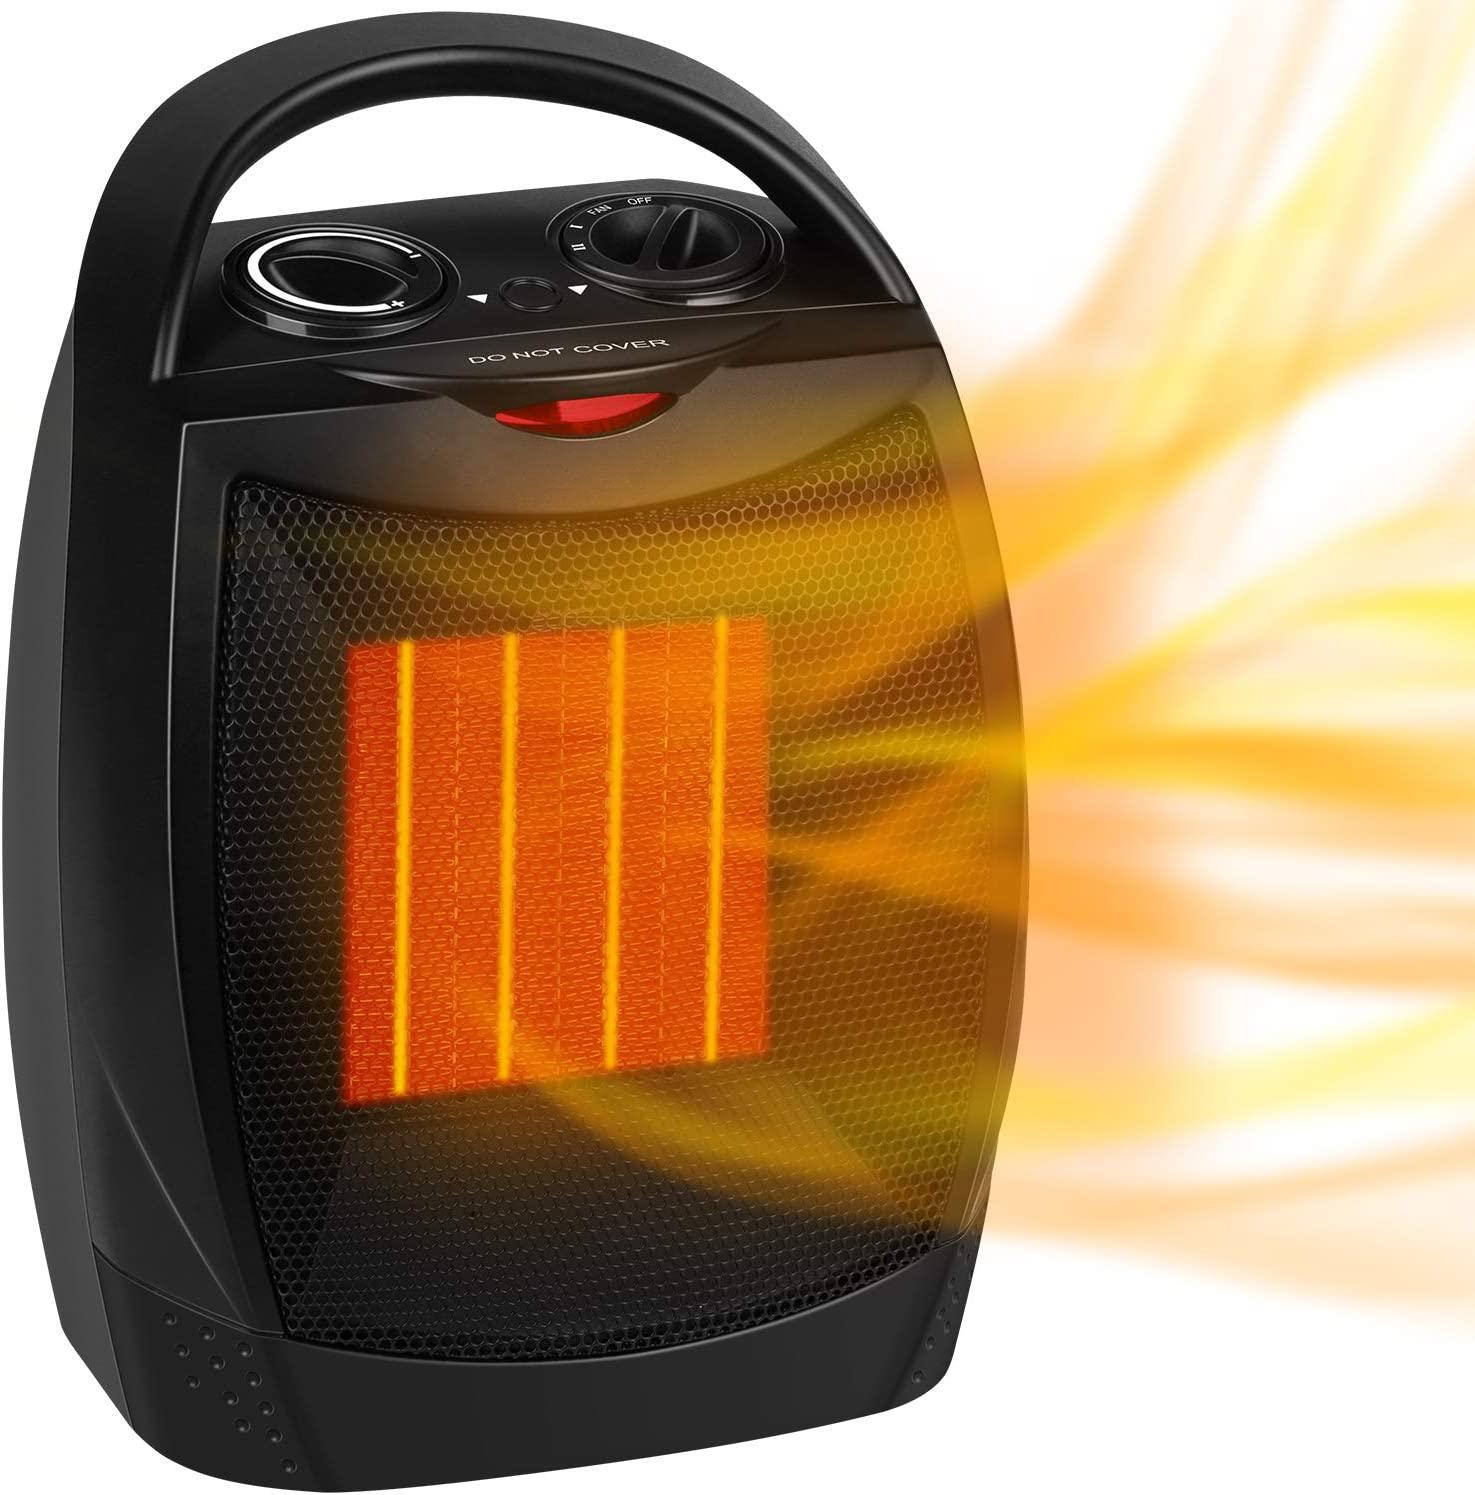 Portable Electric Space Heater with Thermostat, 1500W/750W Safe and Quiet Ceramic Heater Fan - Decotree.co Online Shop